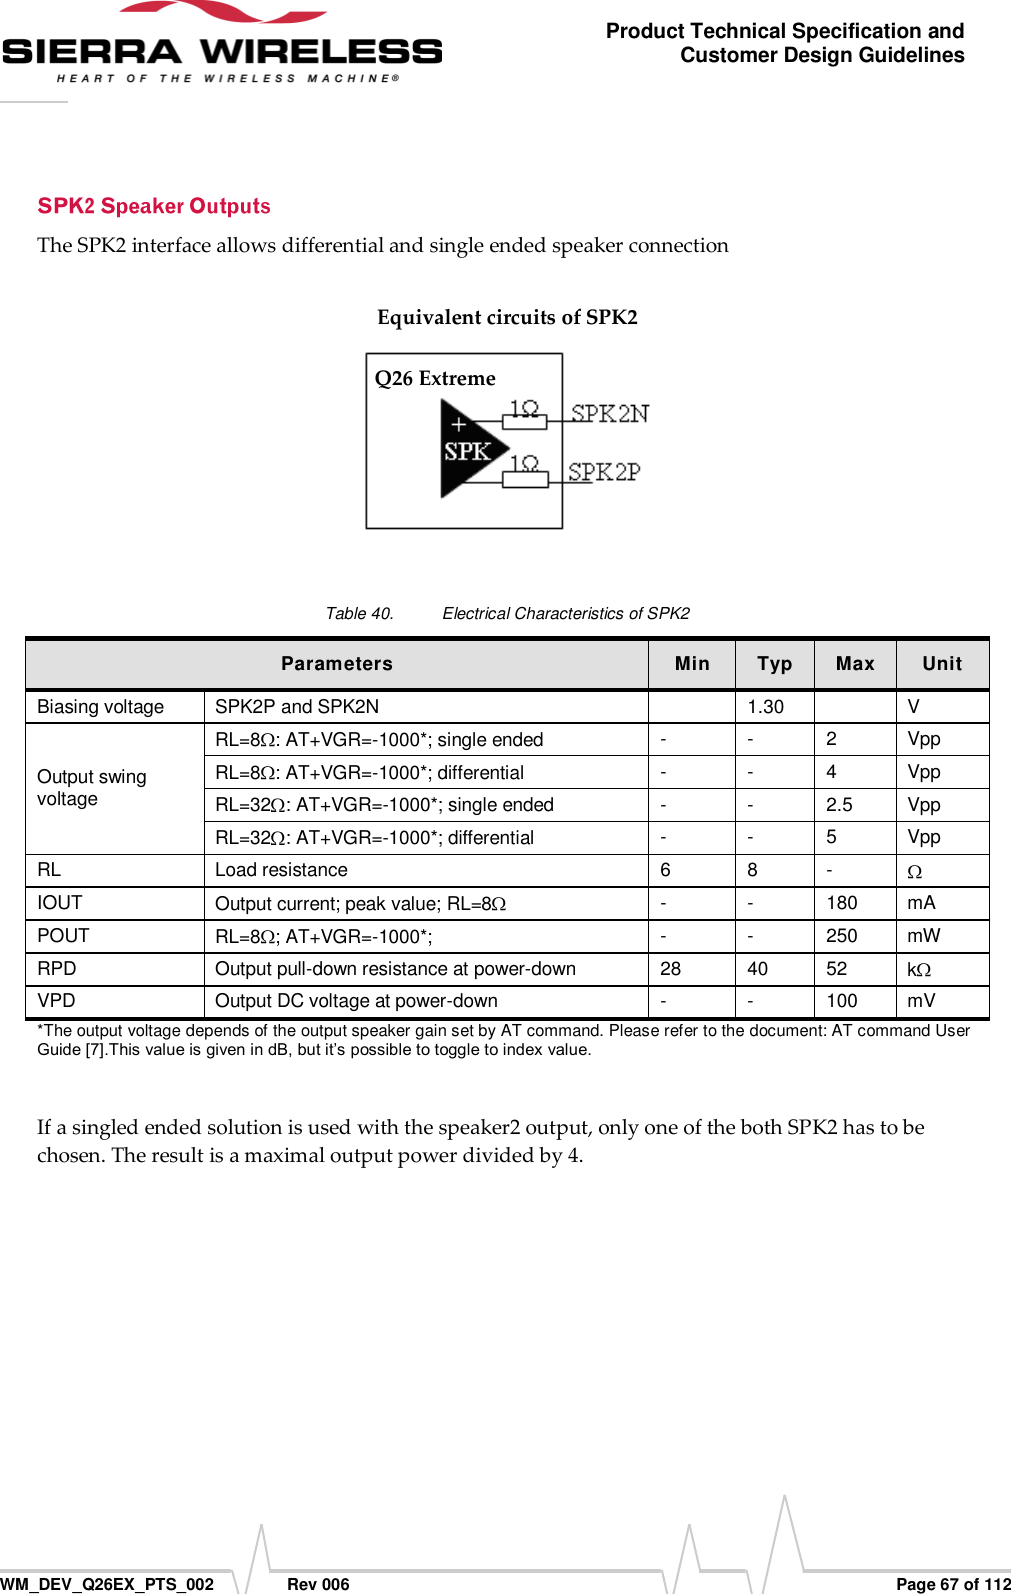      WM_DEV_Q26EX_PTS_002  Rev 006  Page 67 of 112 Product Technical Specification and Customer Design Guidelines The SPK2 interface allows differential and single ended speaker connection  Equivalent circuits of SPK2   Table 40.  Electrical Characteristics of SPK2 Parameters Min Typ Max Unit Biasing voltage SPK2P and SPK2N  1.30  V Output swing voltage RL=8 : AT+VGR=-1000*; single ended - - 2 Vpp RL=8 : AT+VGR=-1000*; differential - - 4 Vpp RL=32 : AT+VGR=-1000*; single ended - - 2.5 Vpp RL=32 : AT+VGR=-1000*; differential - - 5 Vpp RL Load resistance 6 8 -  IOUT Output current; peak value; RL=8  - - 180 mA POUT RL=8 ; AT+VGR=-1000*; - - 250 mW RPD Output pull-down resistance at power-down 28 40 52 k  VPD Output DC voltage at power-down - - 100 mV *The output voltage depends of the output speaker gain set by AT command. Please refer to the document: AT command User Guide [7].This value is given in dB, but it’s possible to toggle to index value.  If a singled ended solution is used with the speaker2 output, only one of the both SPK2 has to be chosen. The result is a maximal output power divided by 4. Q26 Extreme 